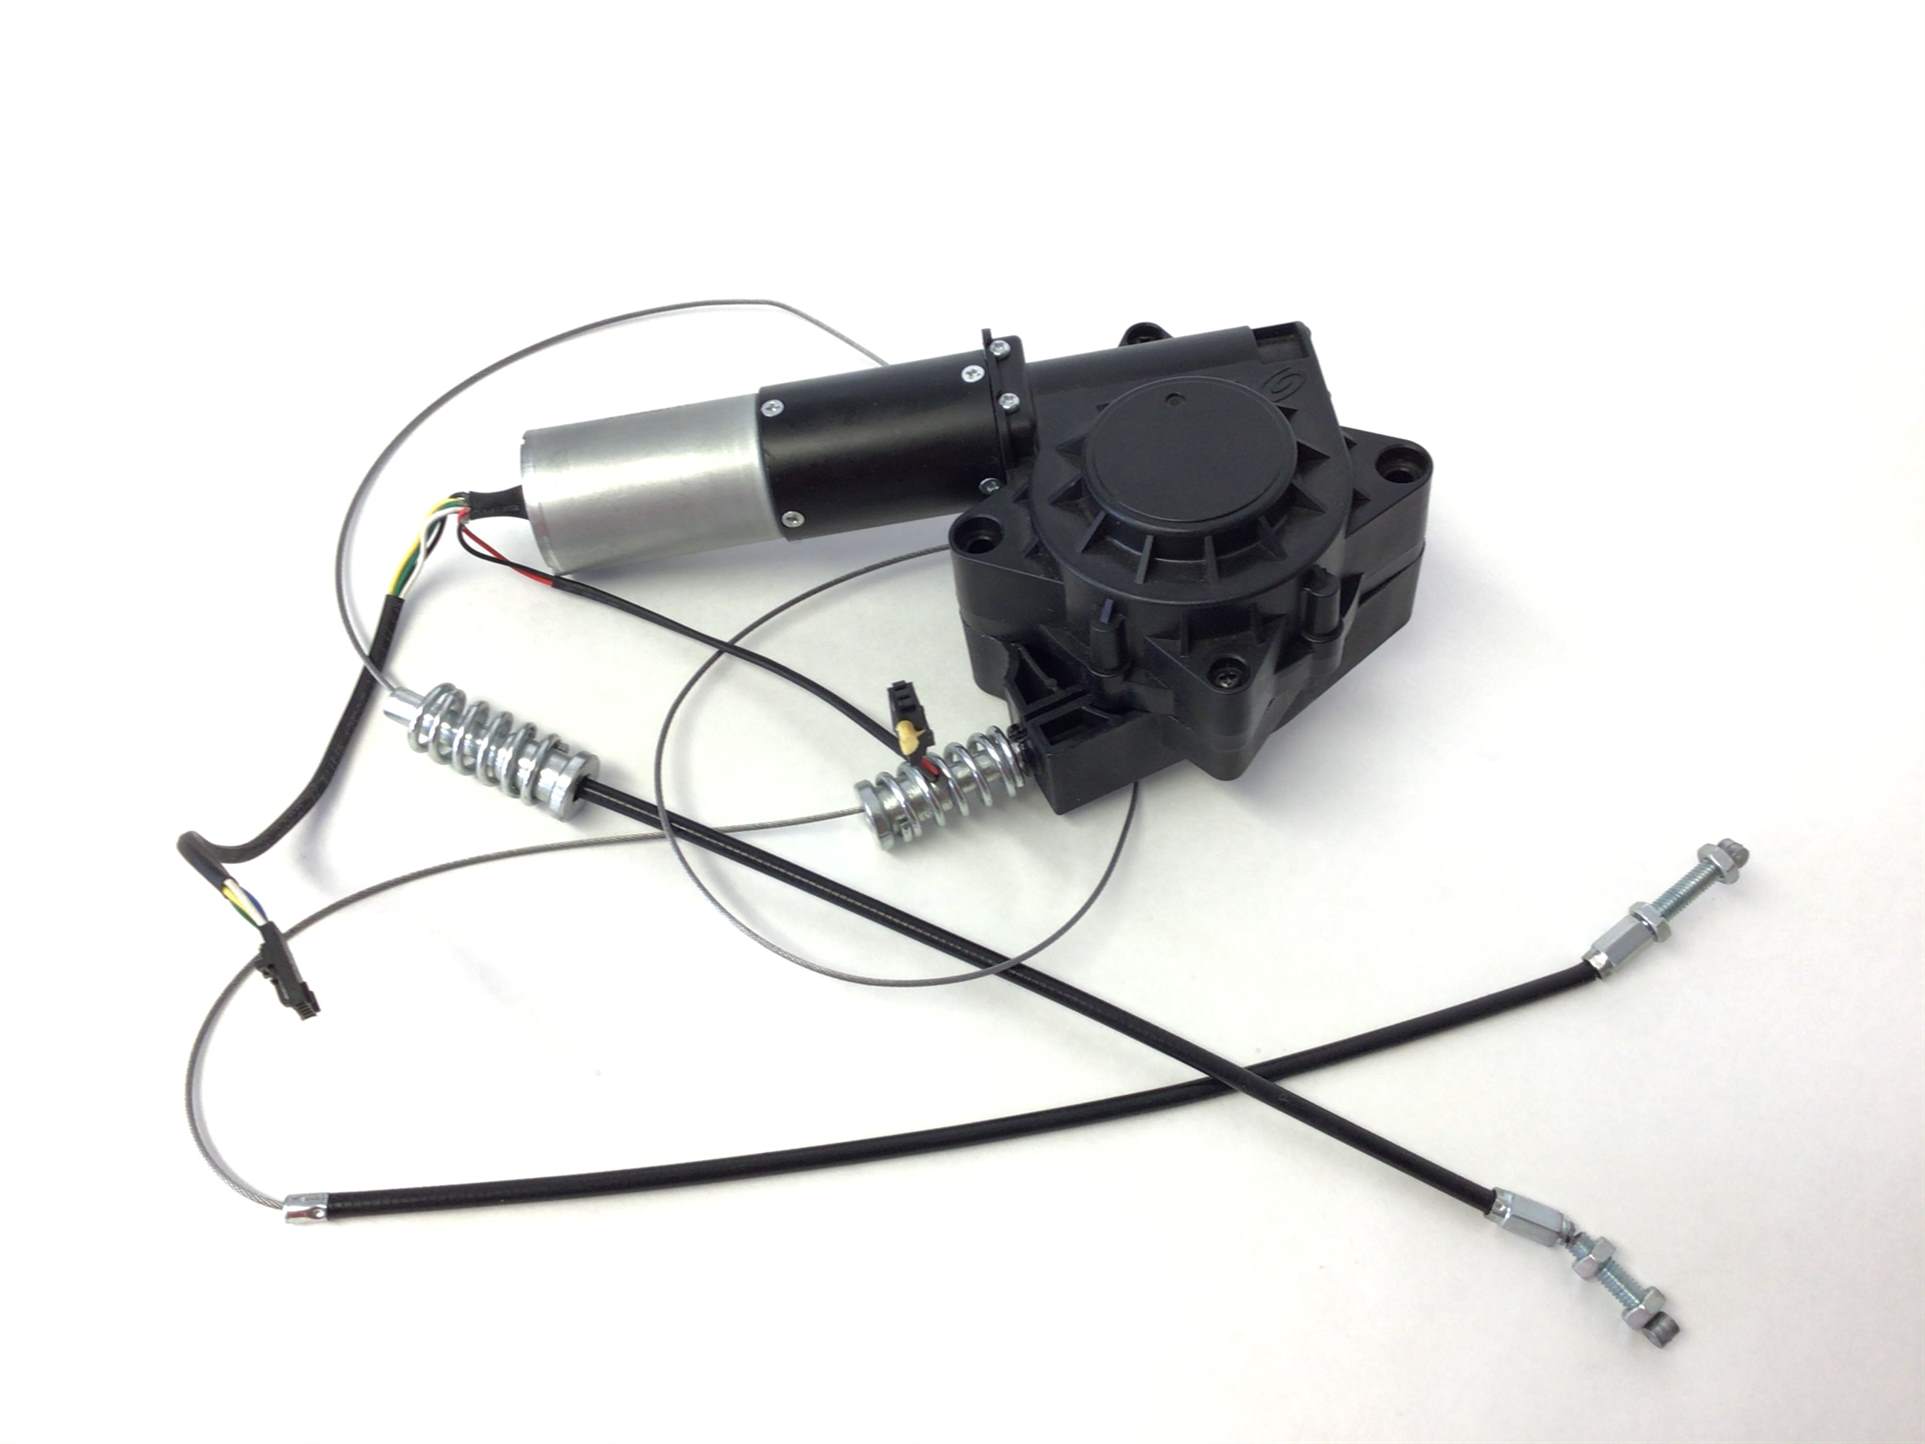 Actuator W Cable Set (Used)